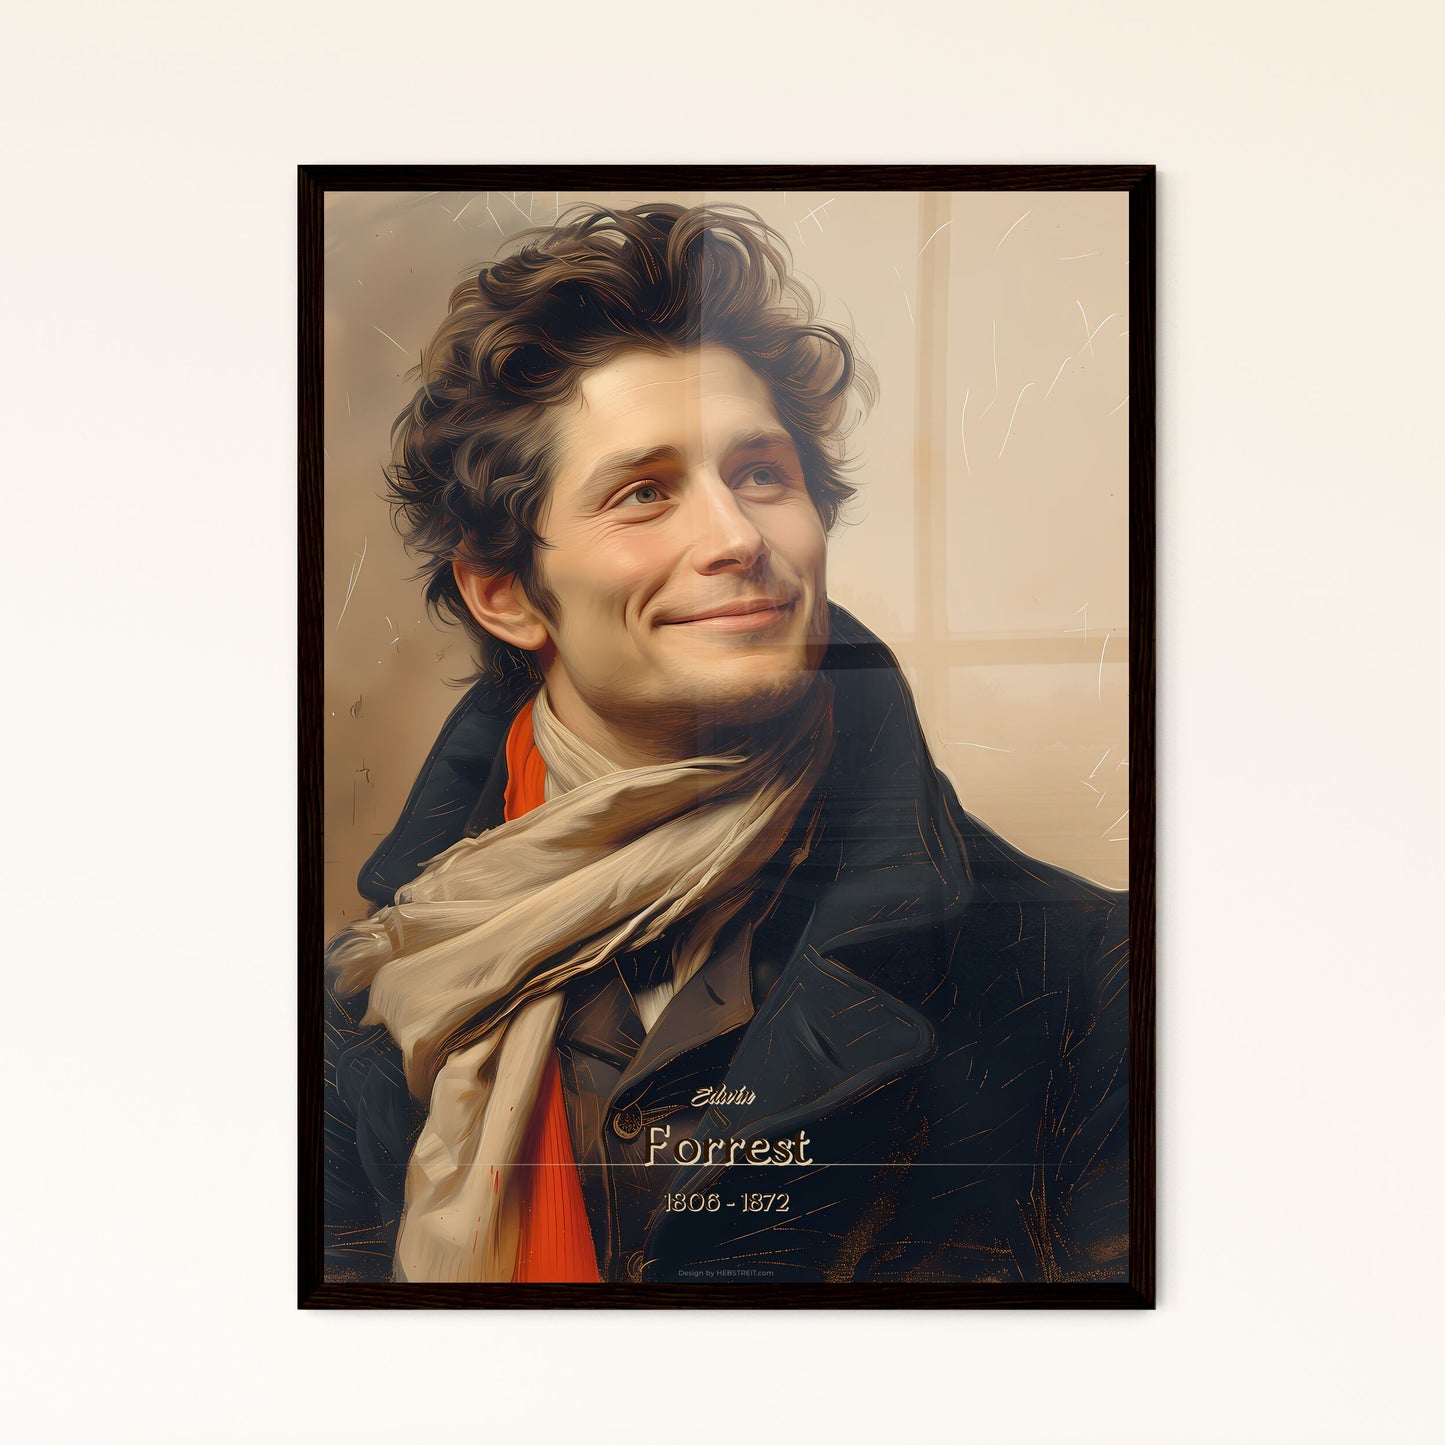 Edwin, Forrest, 1806 - 1872, A Poster of a man in a coat and scarf Default Title